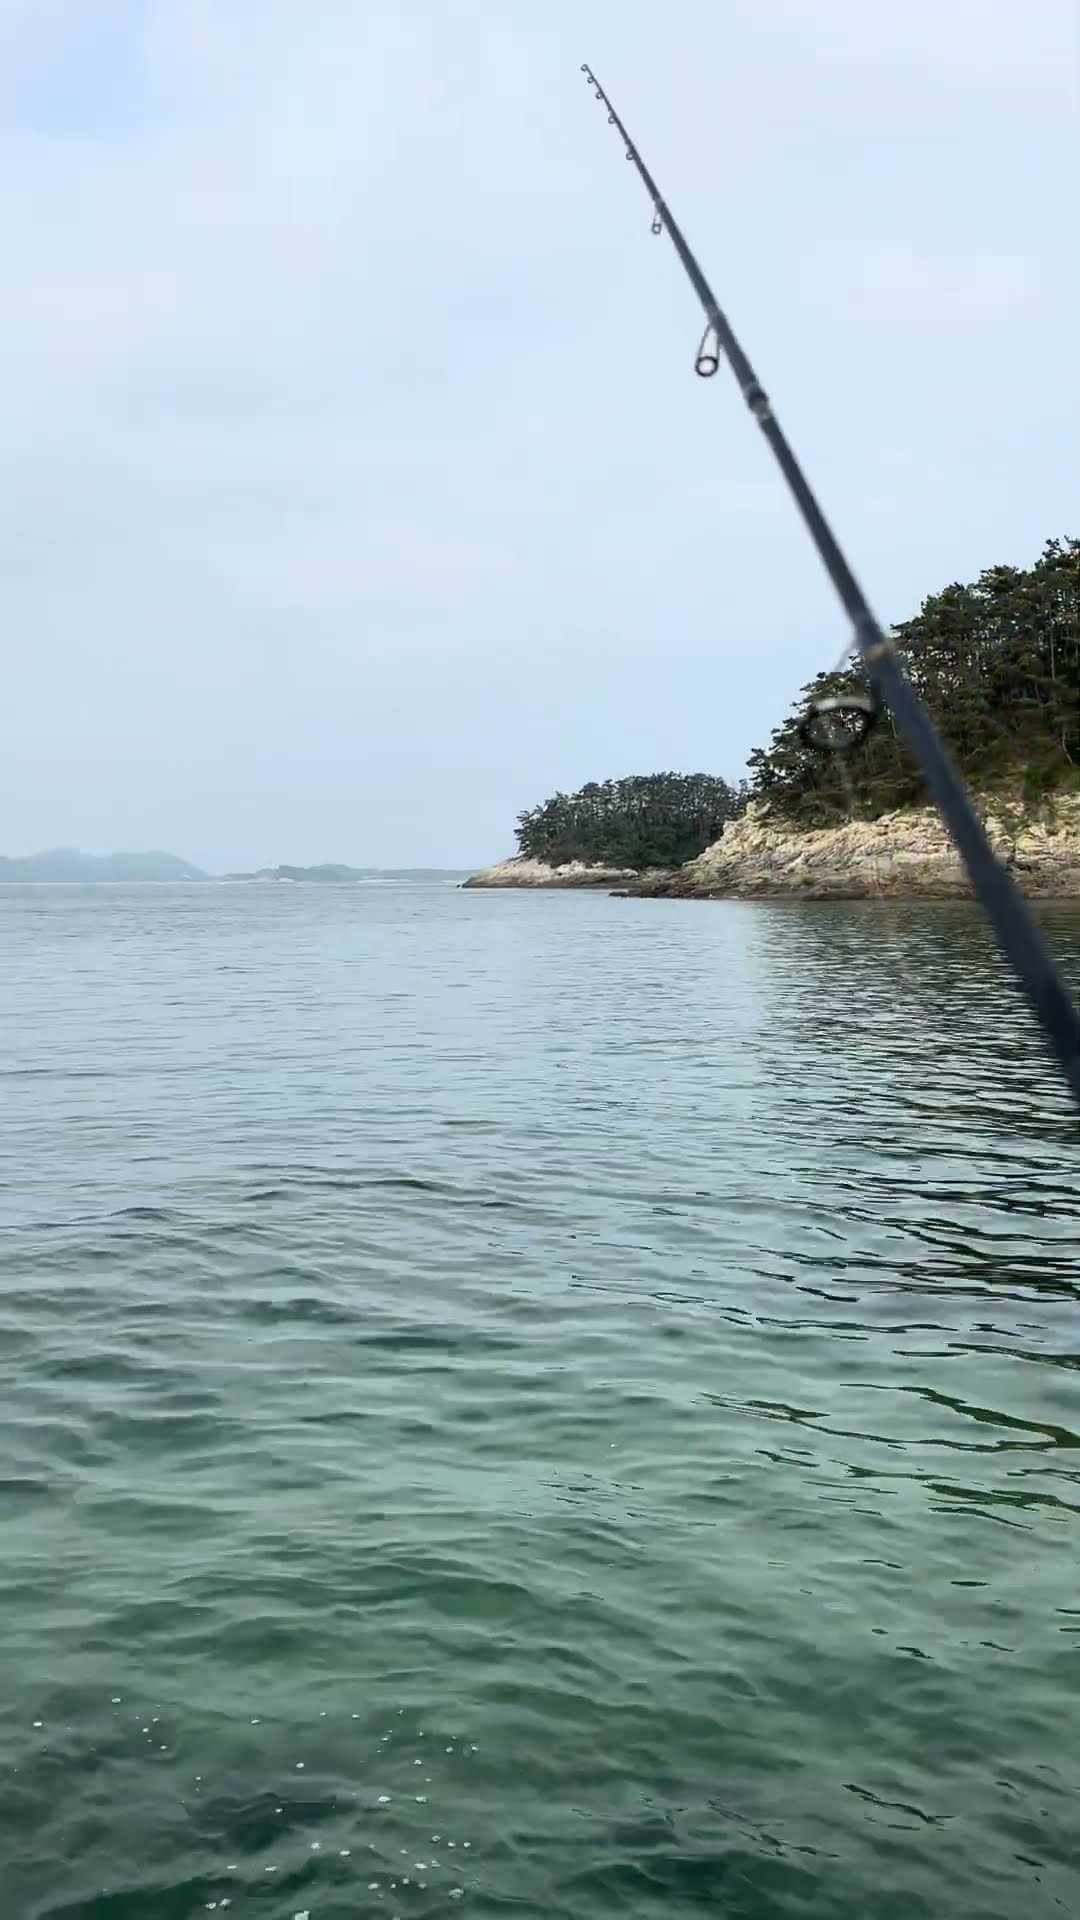 Today its was a fail 😢#낙씨 #fish #fishing #beach #travel - YouTube